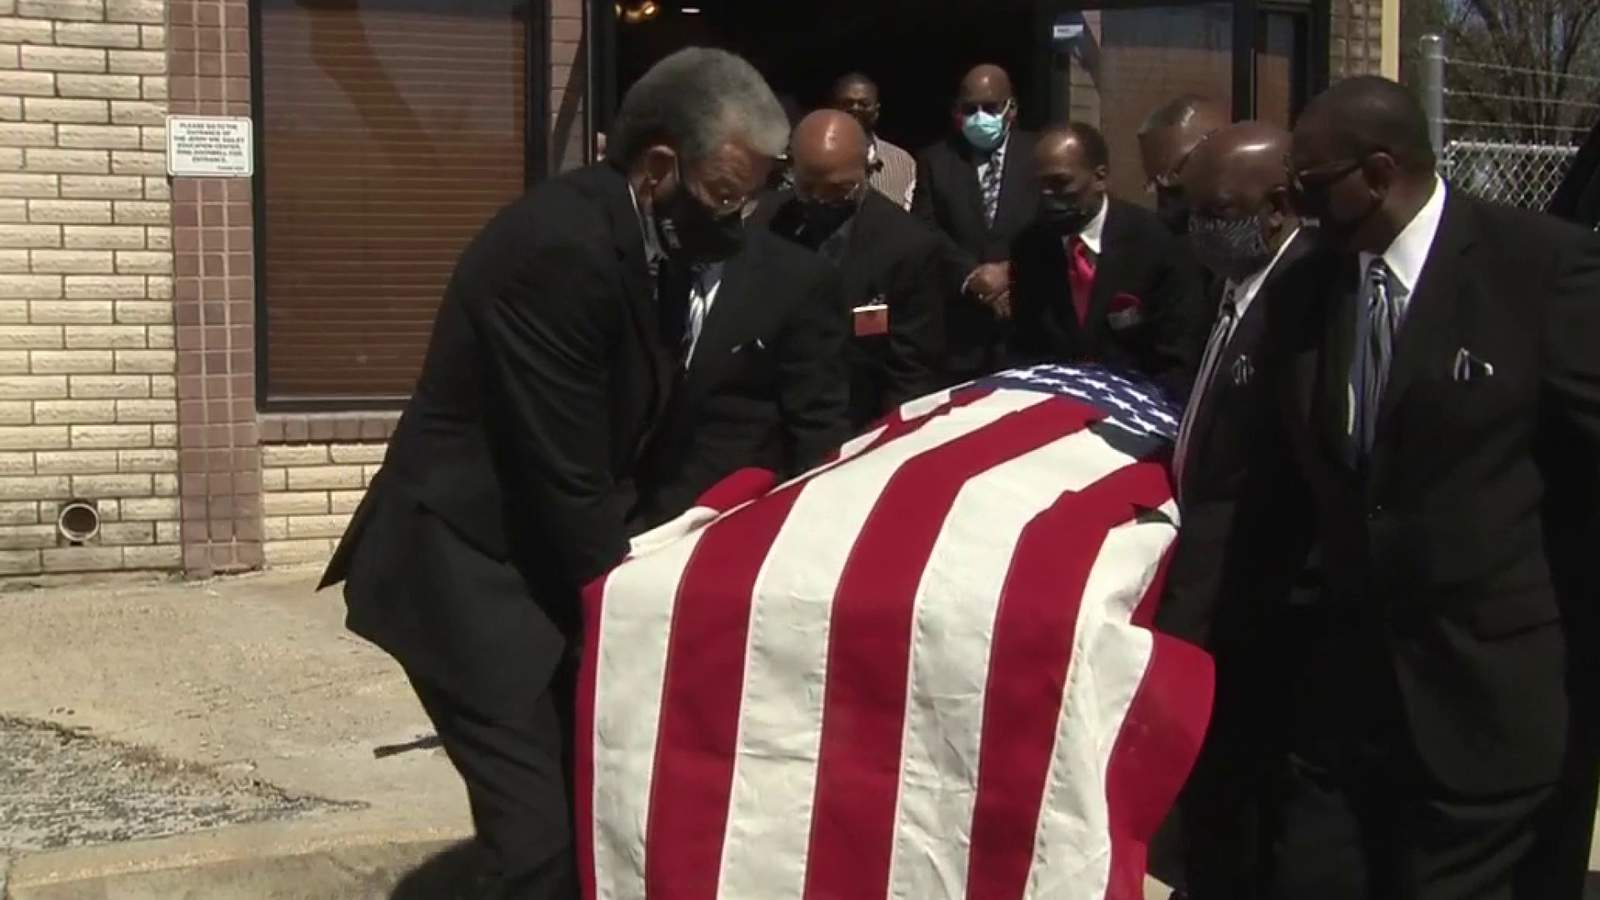 Original Freedom Rider Patricia Dilworth laid to rest, honored for her bravery, service